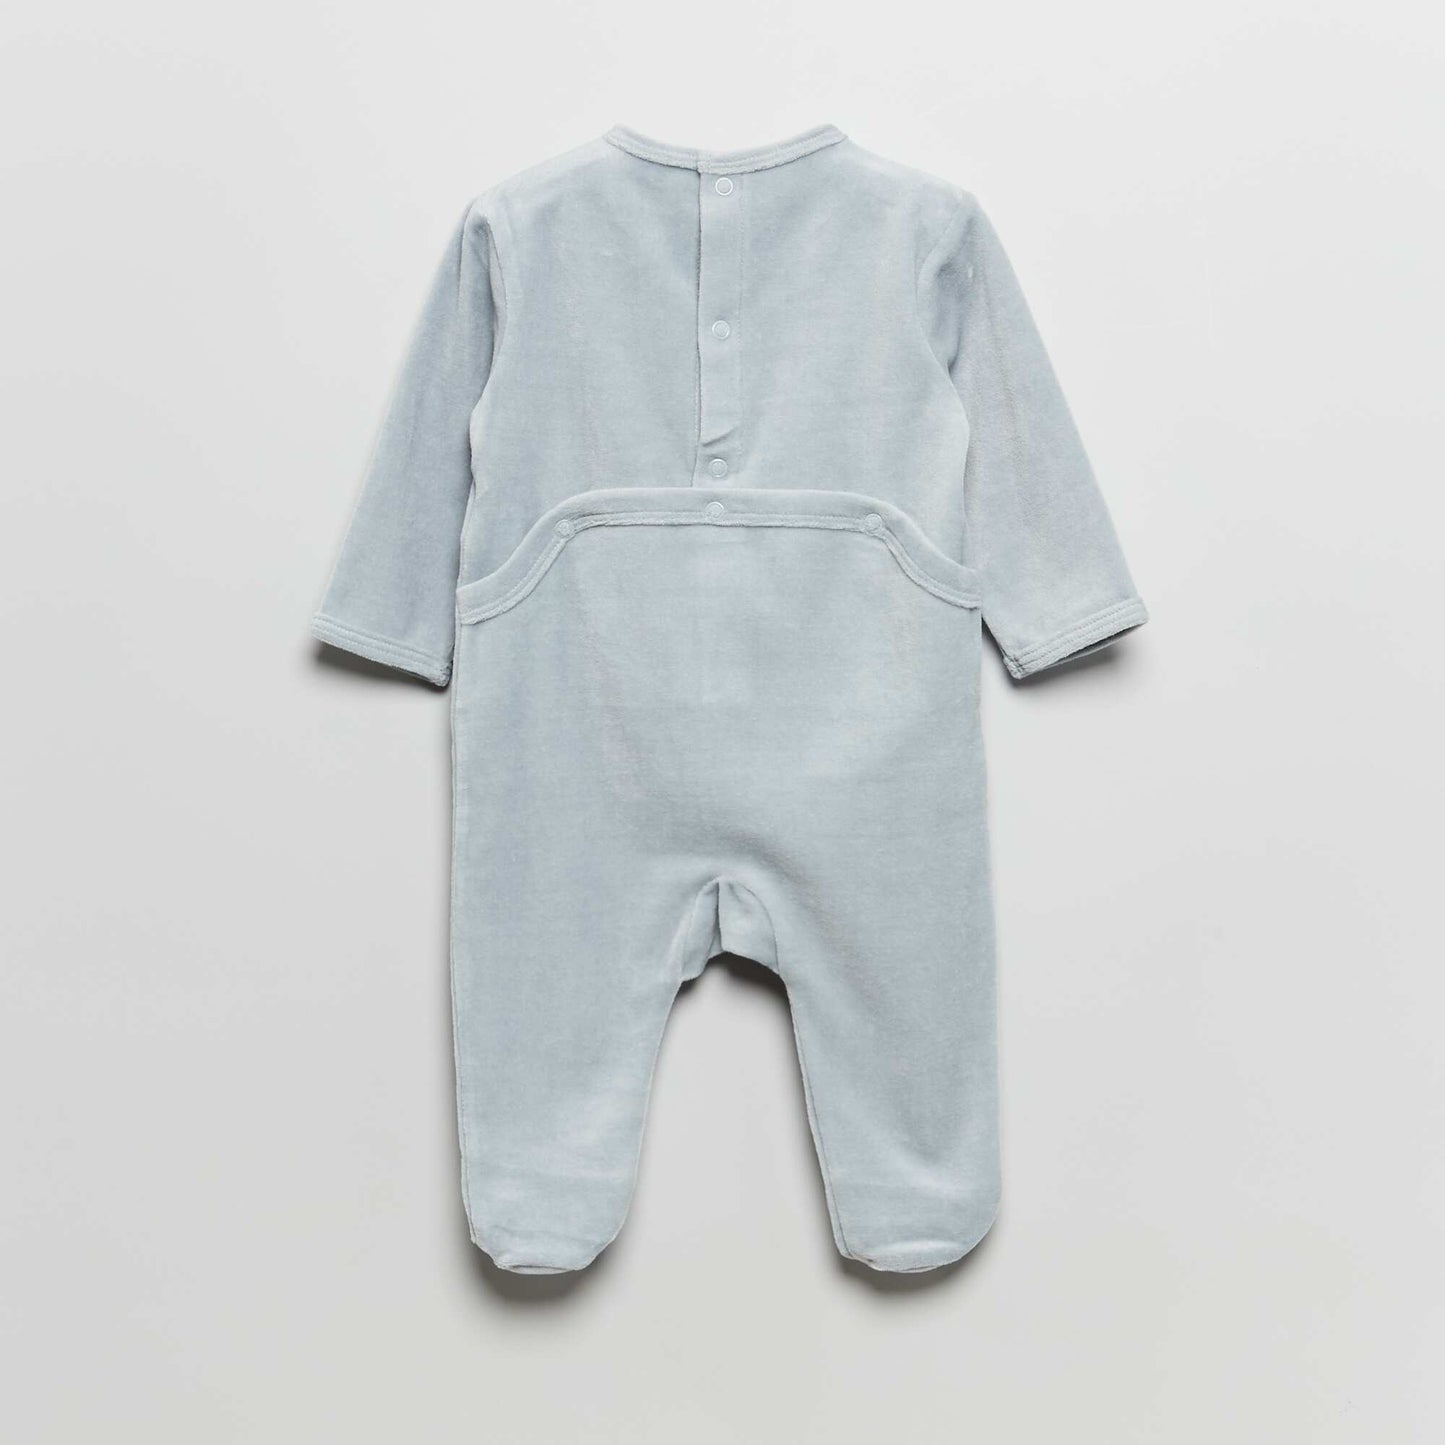 Velour sleepsuit with printed lettering BLUE